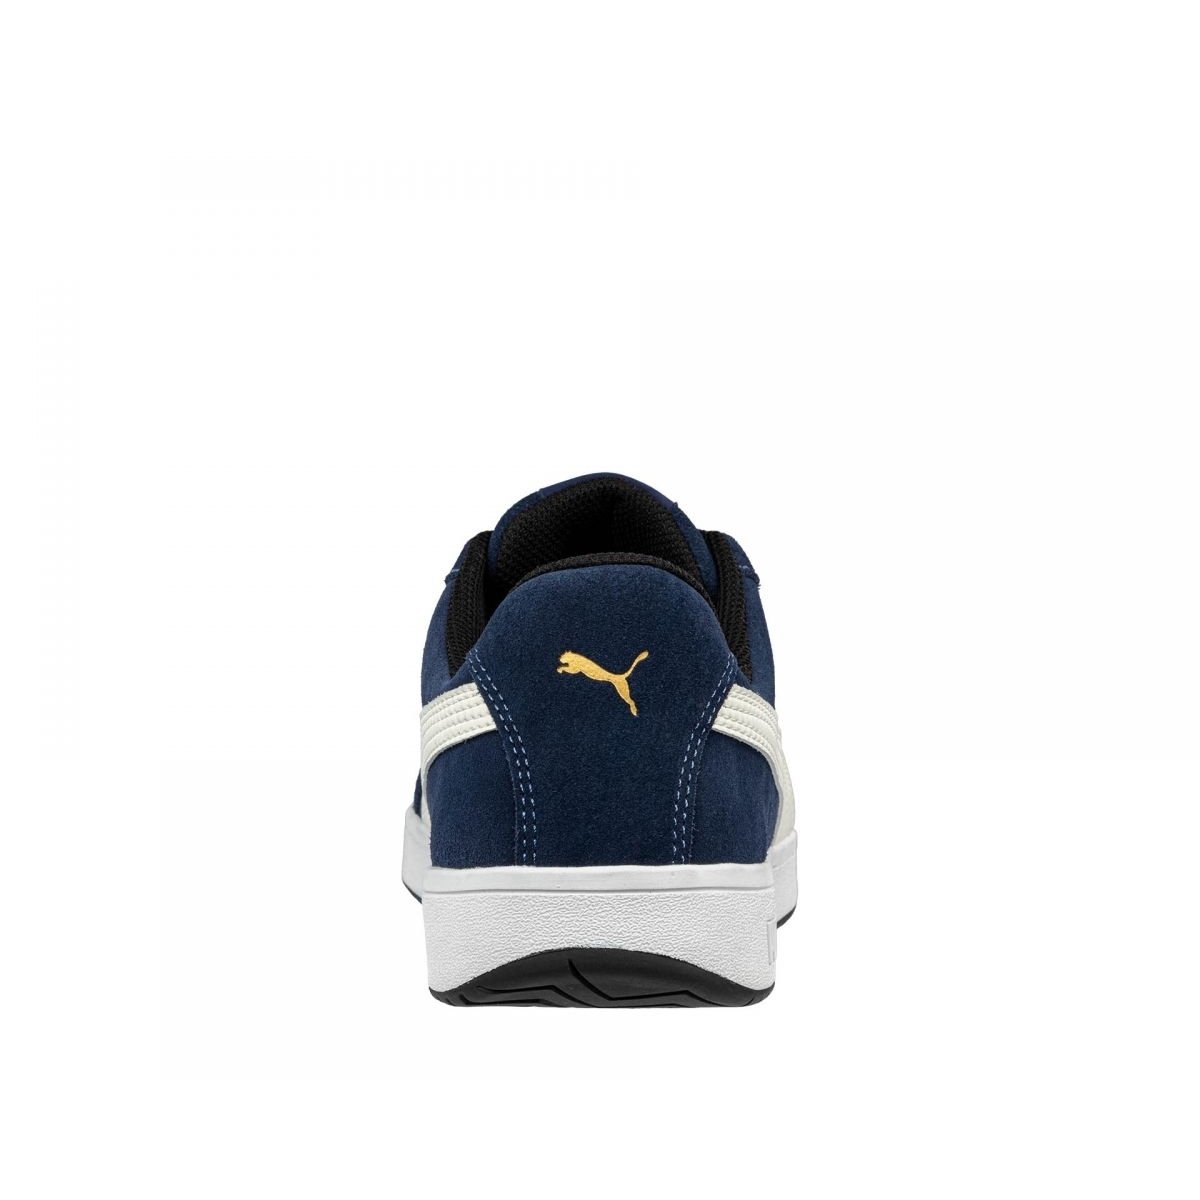 PUMA Safety Men's Iconic Low Composite Toe EH Work Shoes Navy Suede - 640025 ONE SIZE Navy - Navy, 9